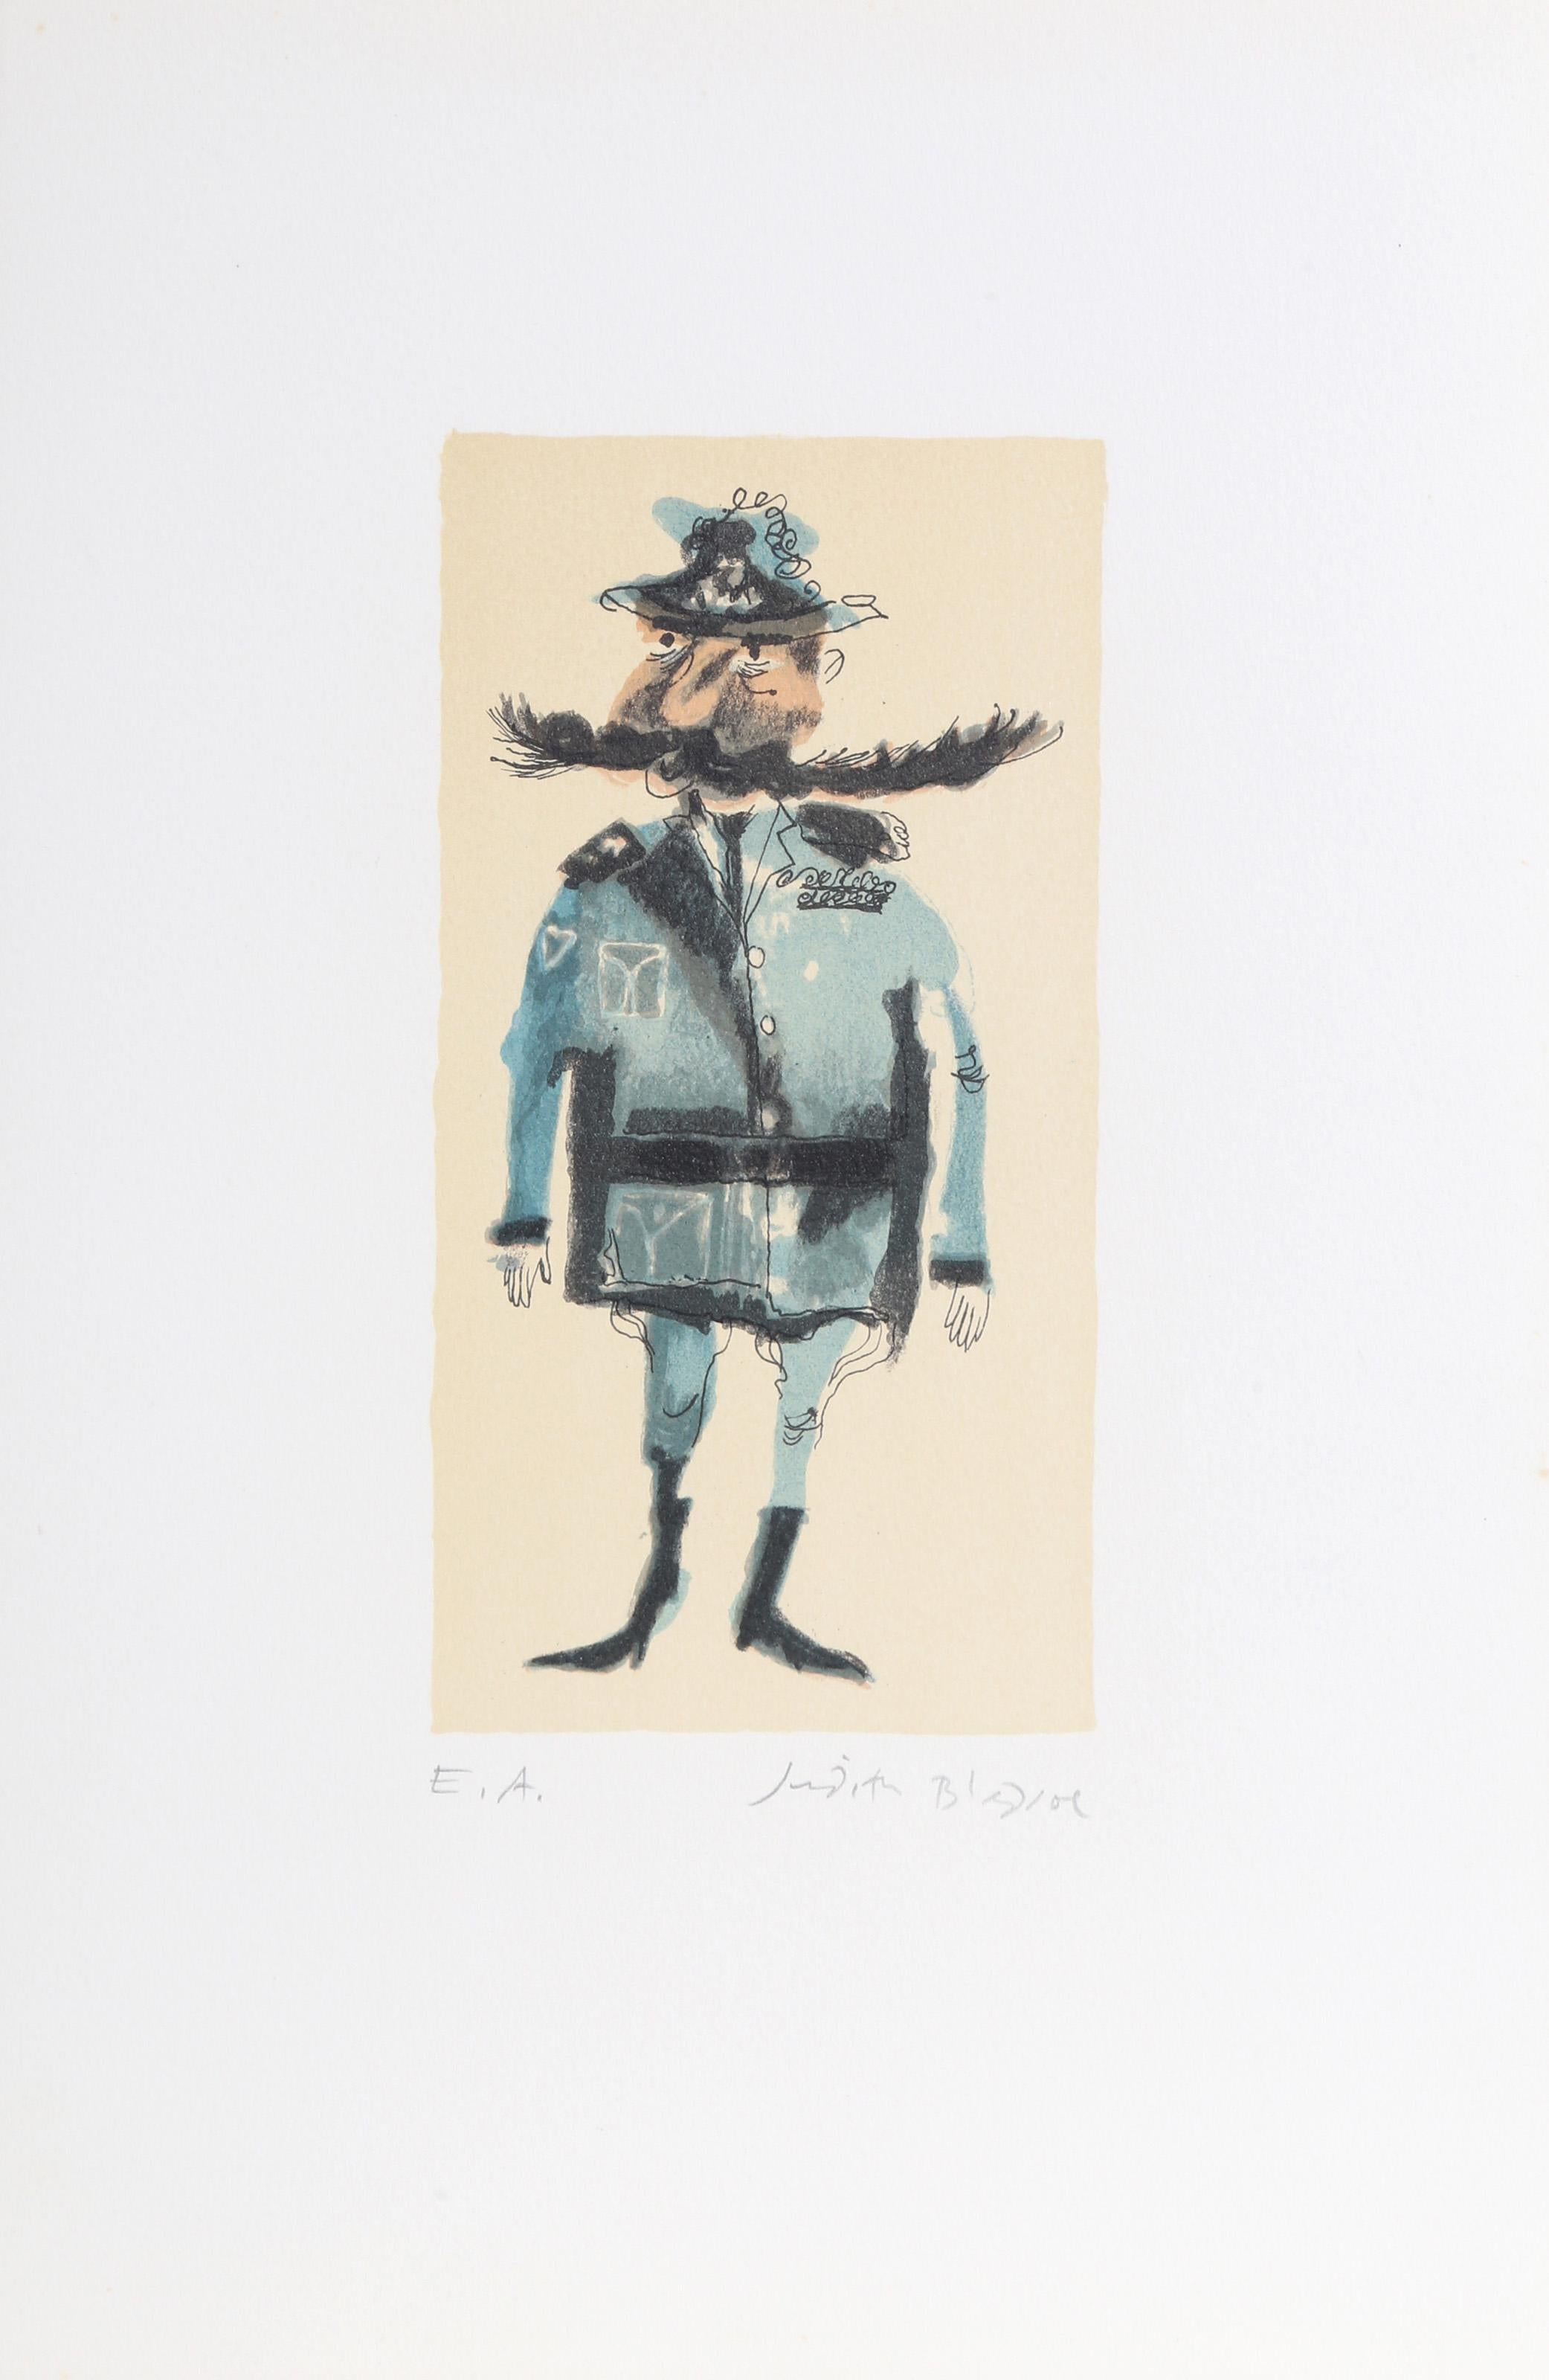 Judith Bledsoe, American (1938 - 2013) -  Petite Portrait - Policeman. Year: circa 1974, Medium: Lithograph, signed in pencil, Edition: EA, Image Size: 8 x 6 inches, Size: 15  x 10.5 in. (38.1  x 26.67 cm), Description: Donning knee-high black